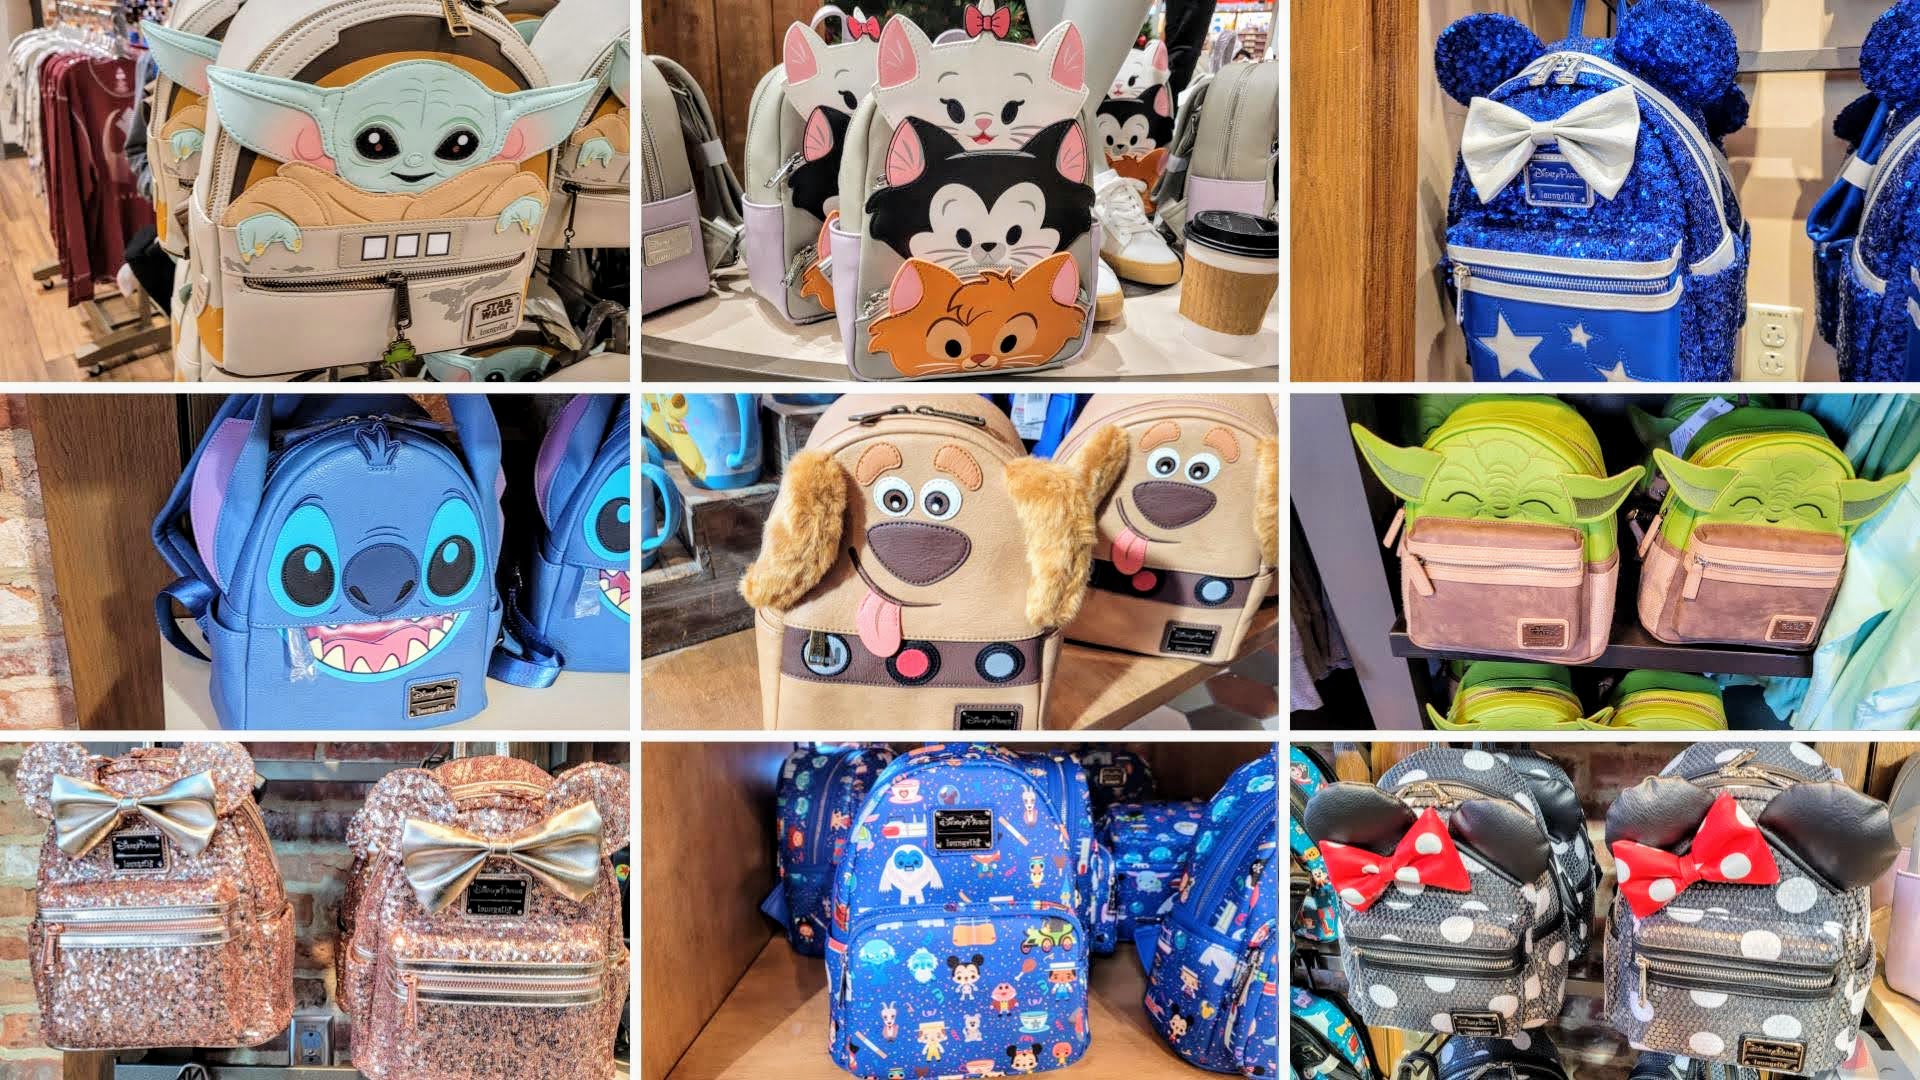 PHOTOS: New Disney Parks Minnie Mouse Autograph Backpack by Loungefly  Brings Style to Disney Springs - WDW News Today